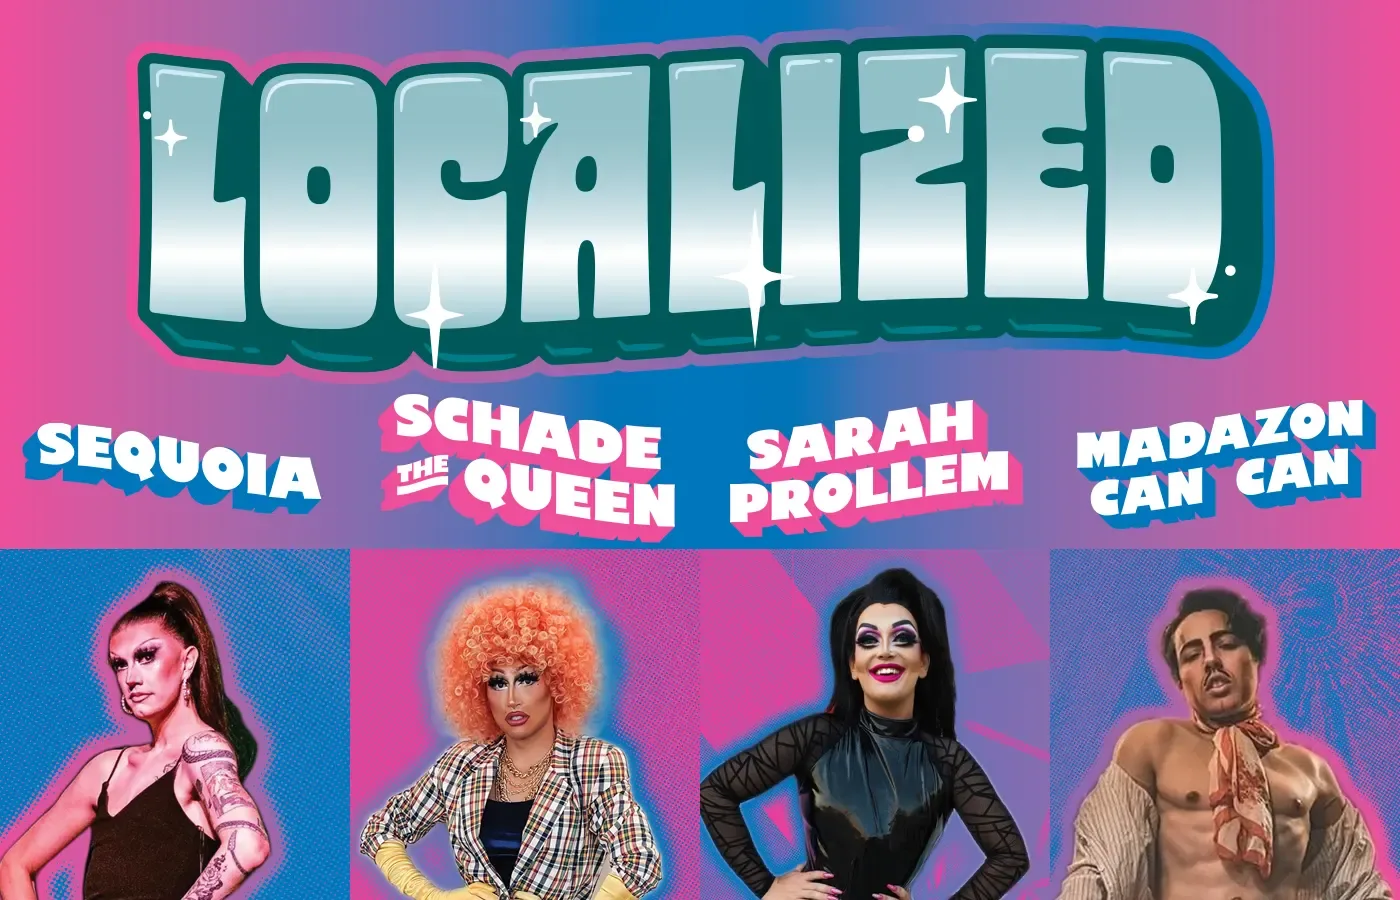 Localized - Sequoia, Schade the Queen, Sarah Prollem, and Can Can